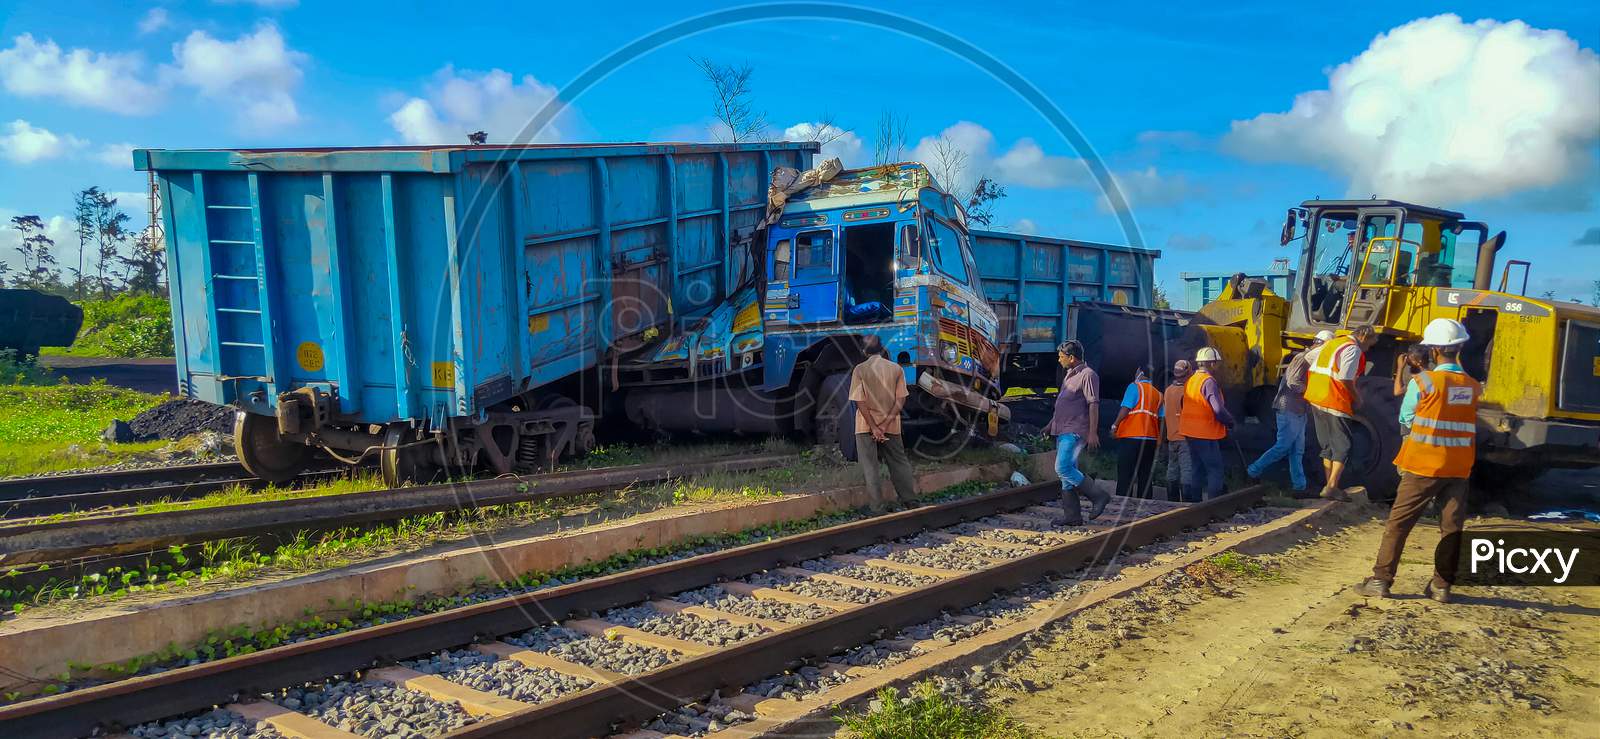 Paradeep, Odisha, India- July 22, 2020: A Rail Accident Near A Construction Site At Paradeep. Rail Wagons Hit A Truck And Has Risen Above It. Workers And A Bulldozer Are Engage For Removing Debris.